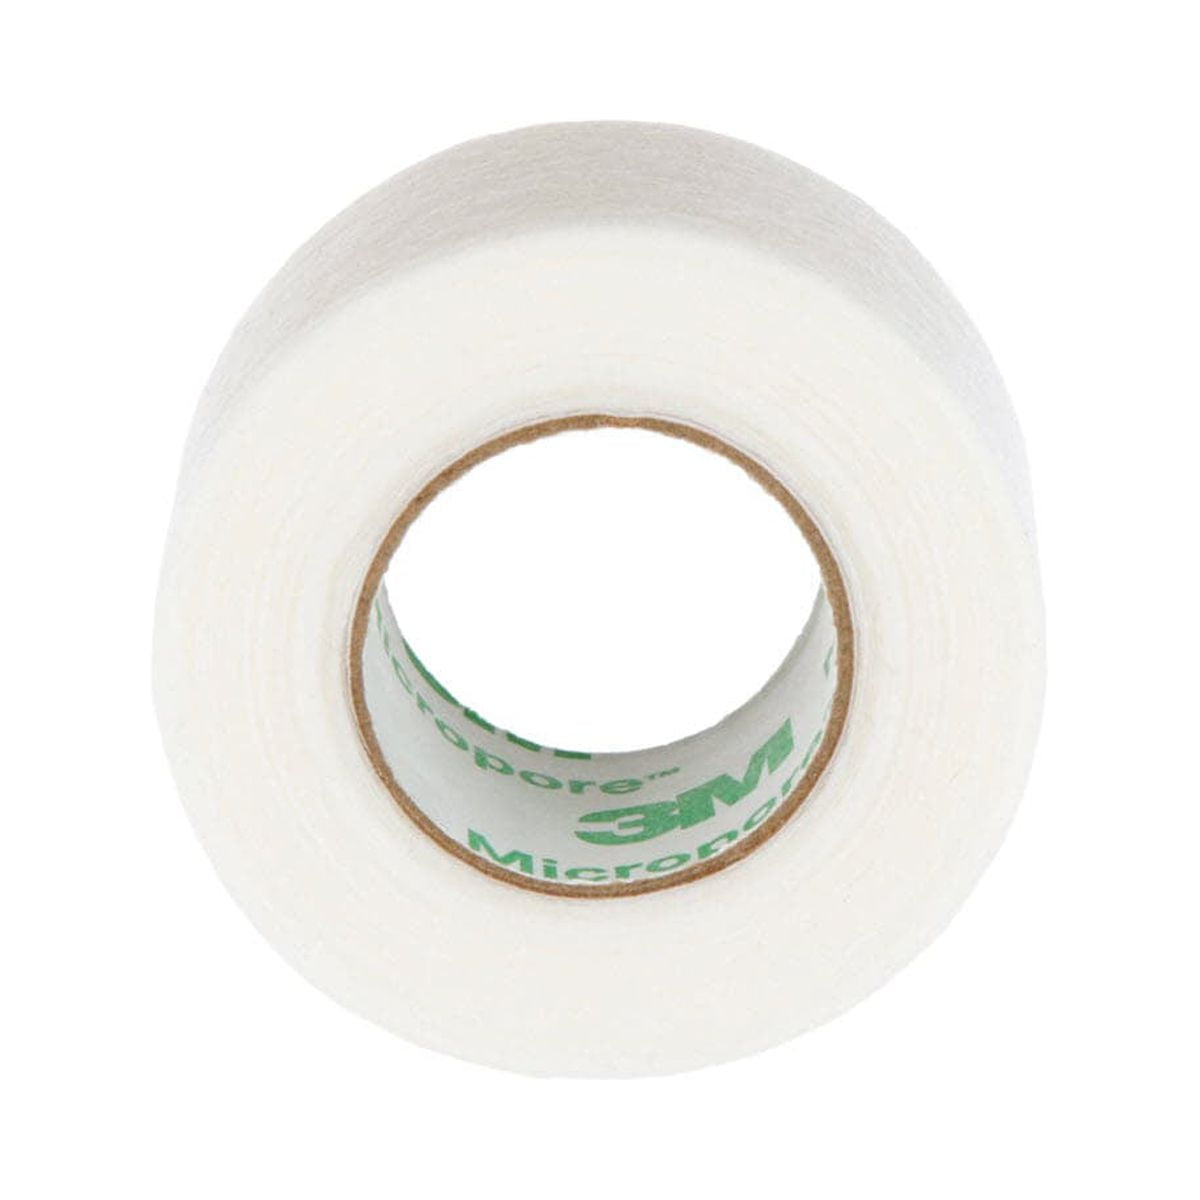 Micropore Surgical Paper Tape - 3 inch x 10 yards, White, Hospital pack,  Box of 4 rolls – woundcareshop